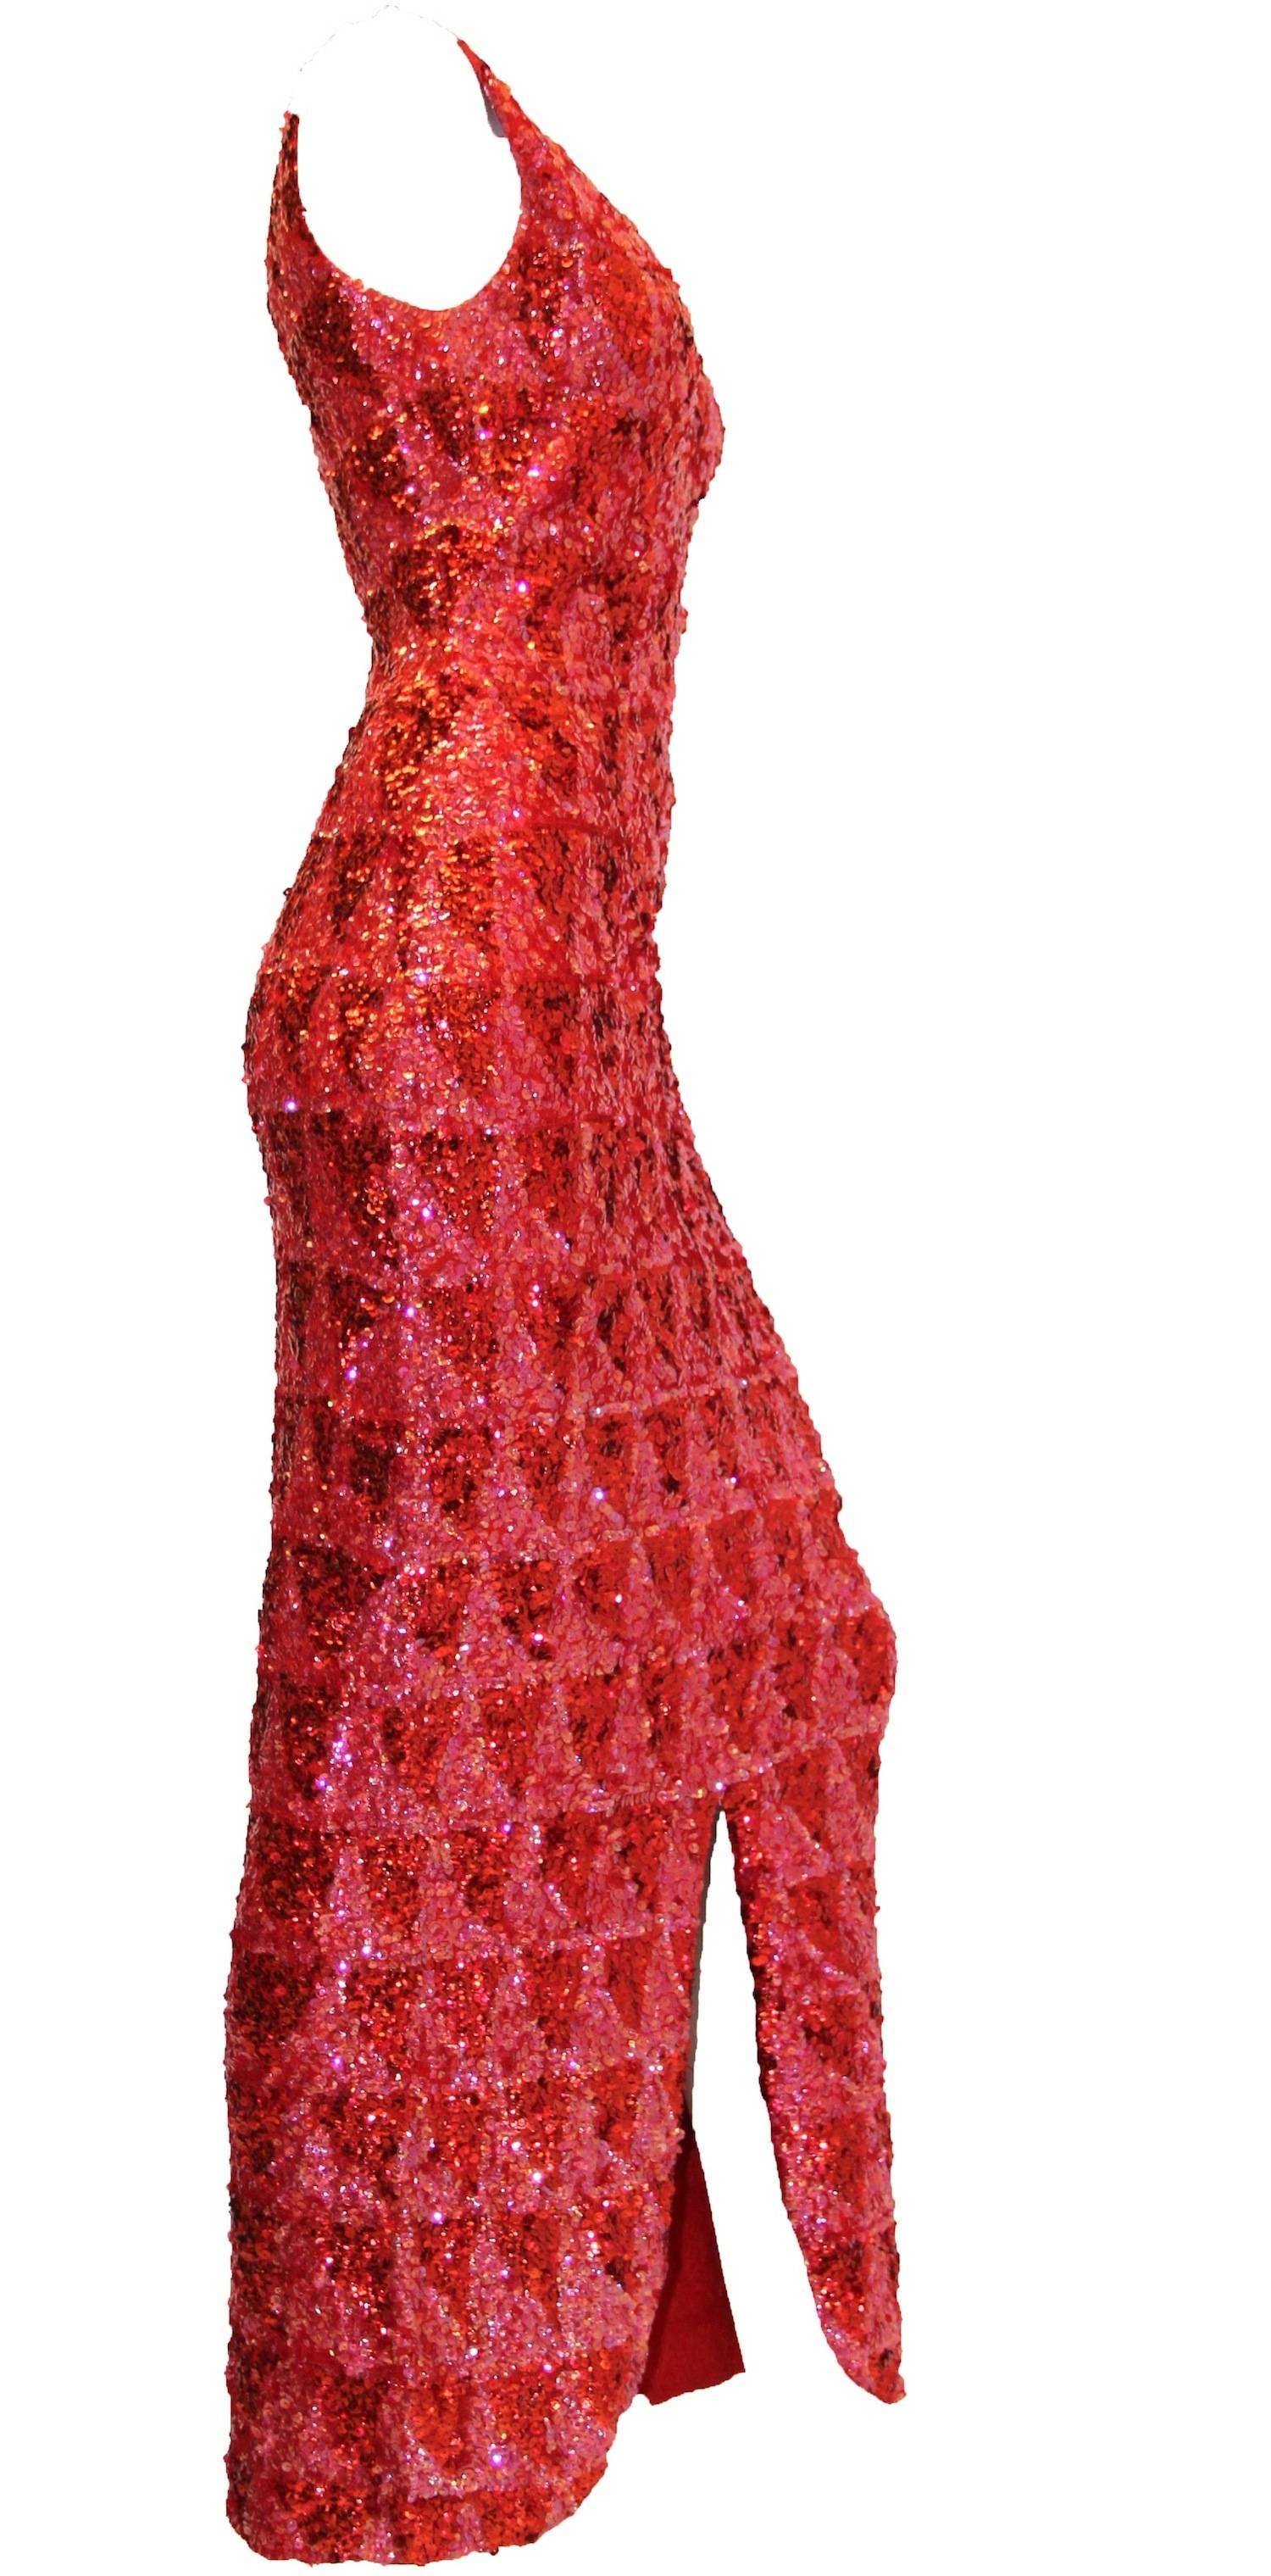 One of a kind 1950's/60's heavily hand sequined custom made knit dress in shades of red and pink. V neckline, form fitting silhouette and front slit makes this dress a real show stopper! 

Measurements: ( this dress is knit and therefor it does